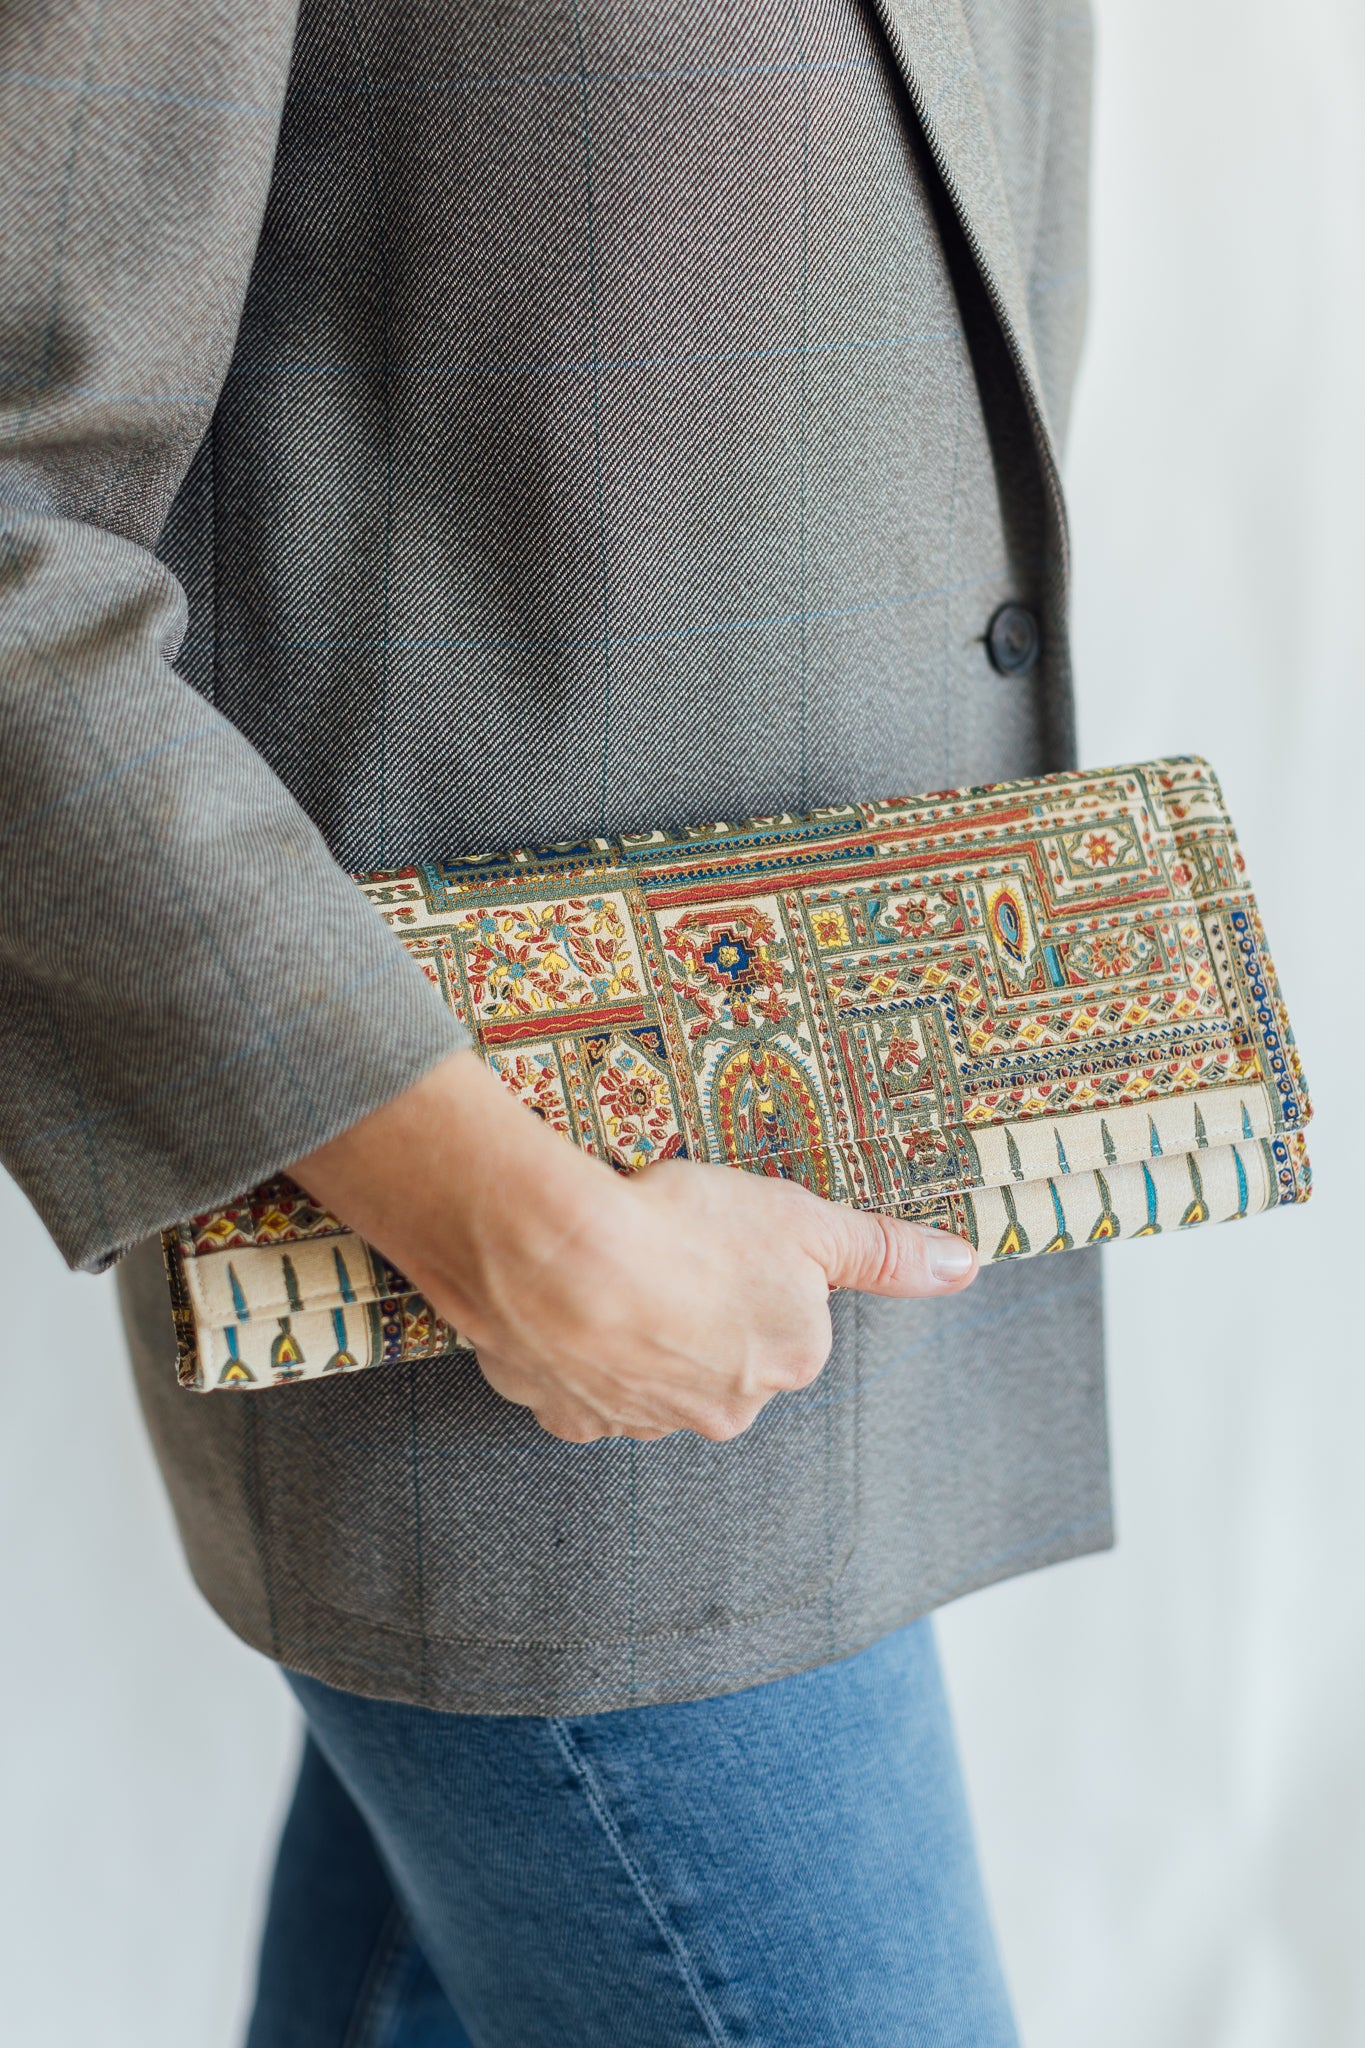 Stylecraft Multicolored Textile Patterned Clutch